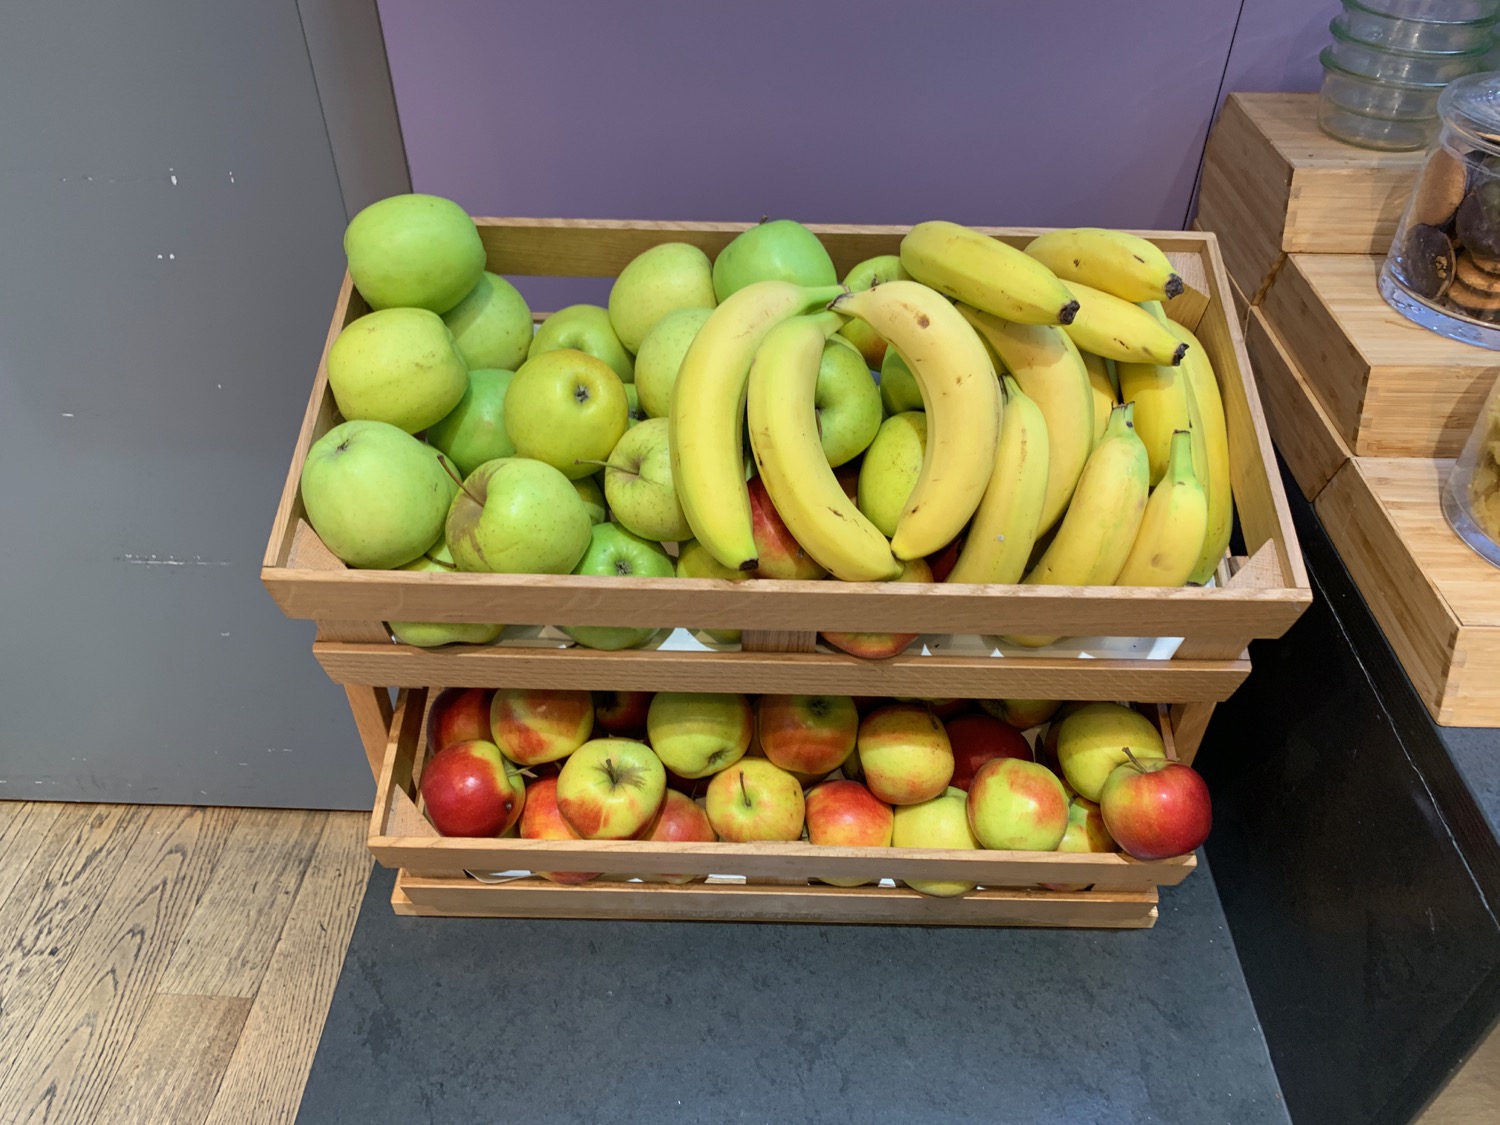 a wooden crate full of apples and bananas